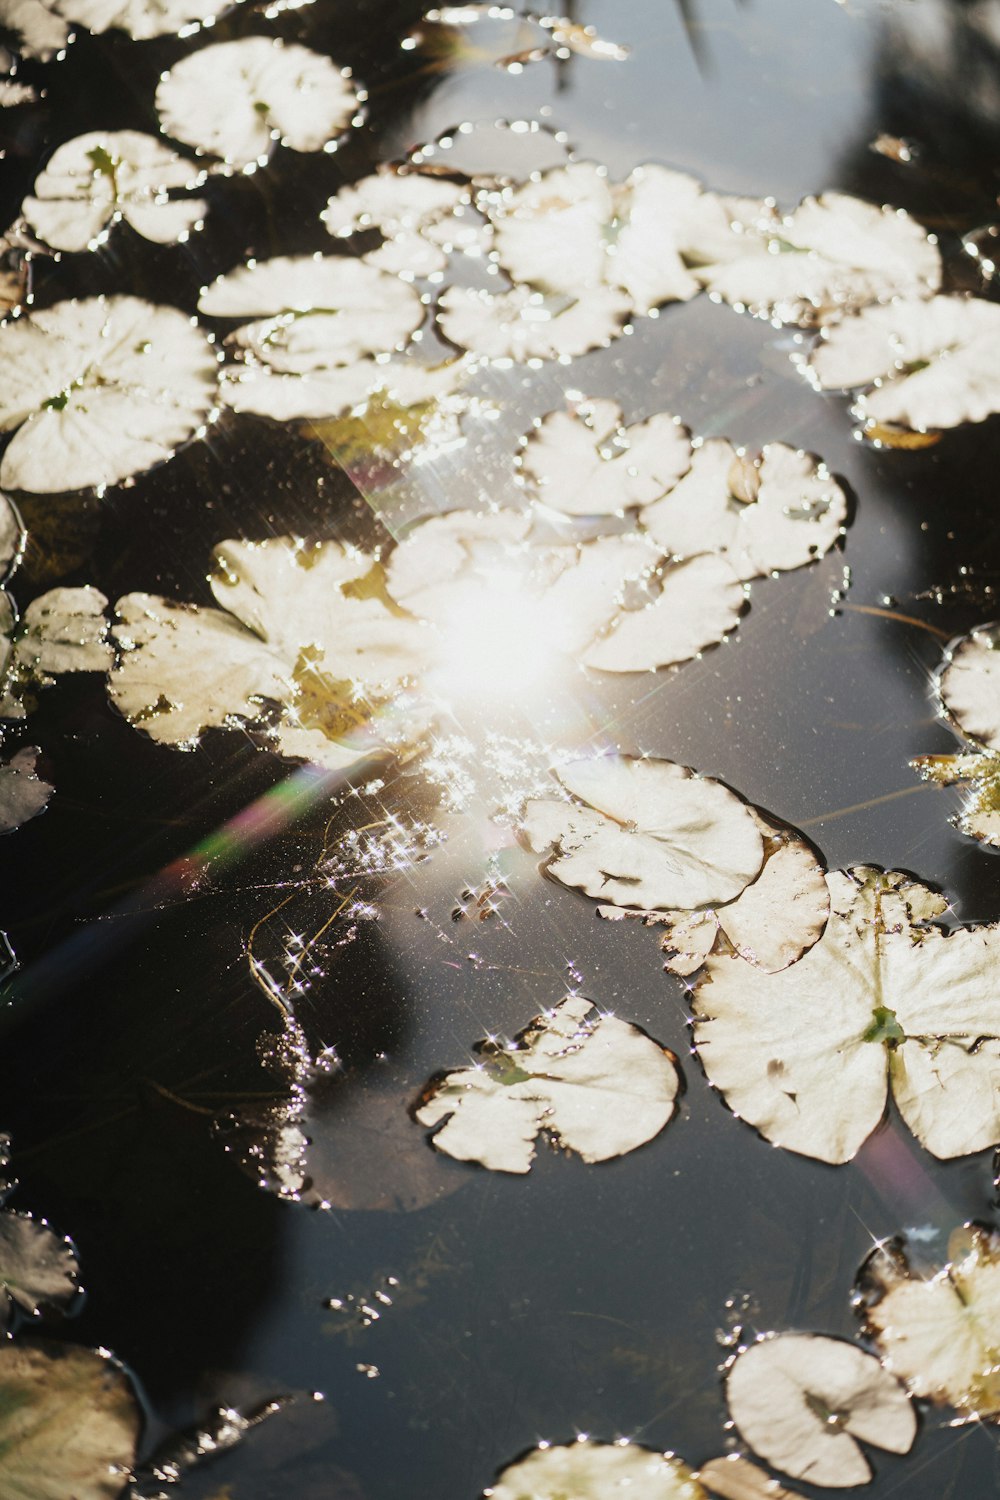 the sun is shining over lily pads in the water